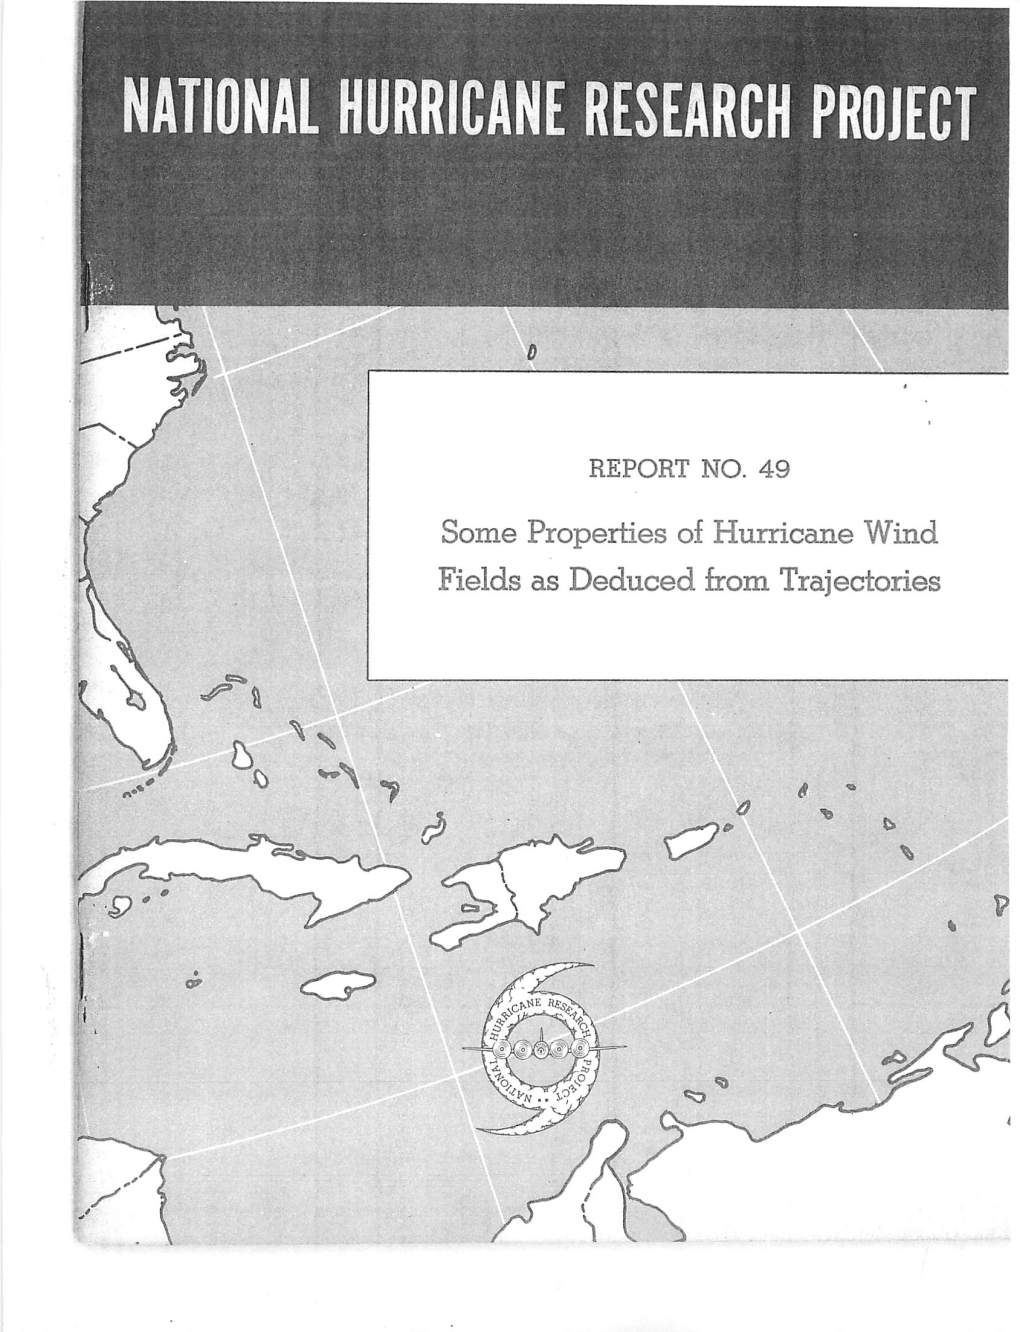 Some Properties of Hurricane Wind Fields As Deduced from Trajectories